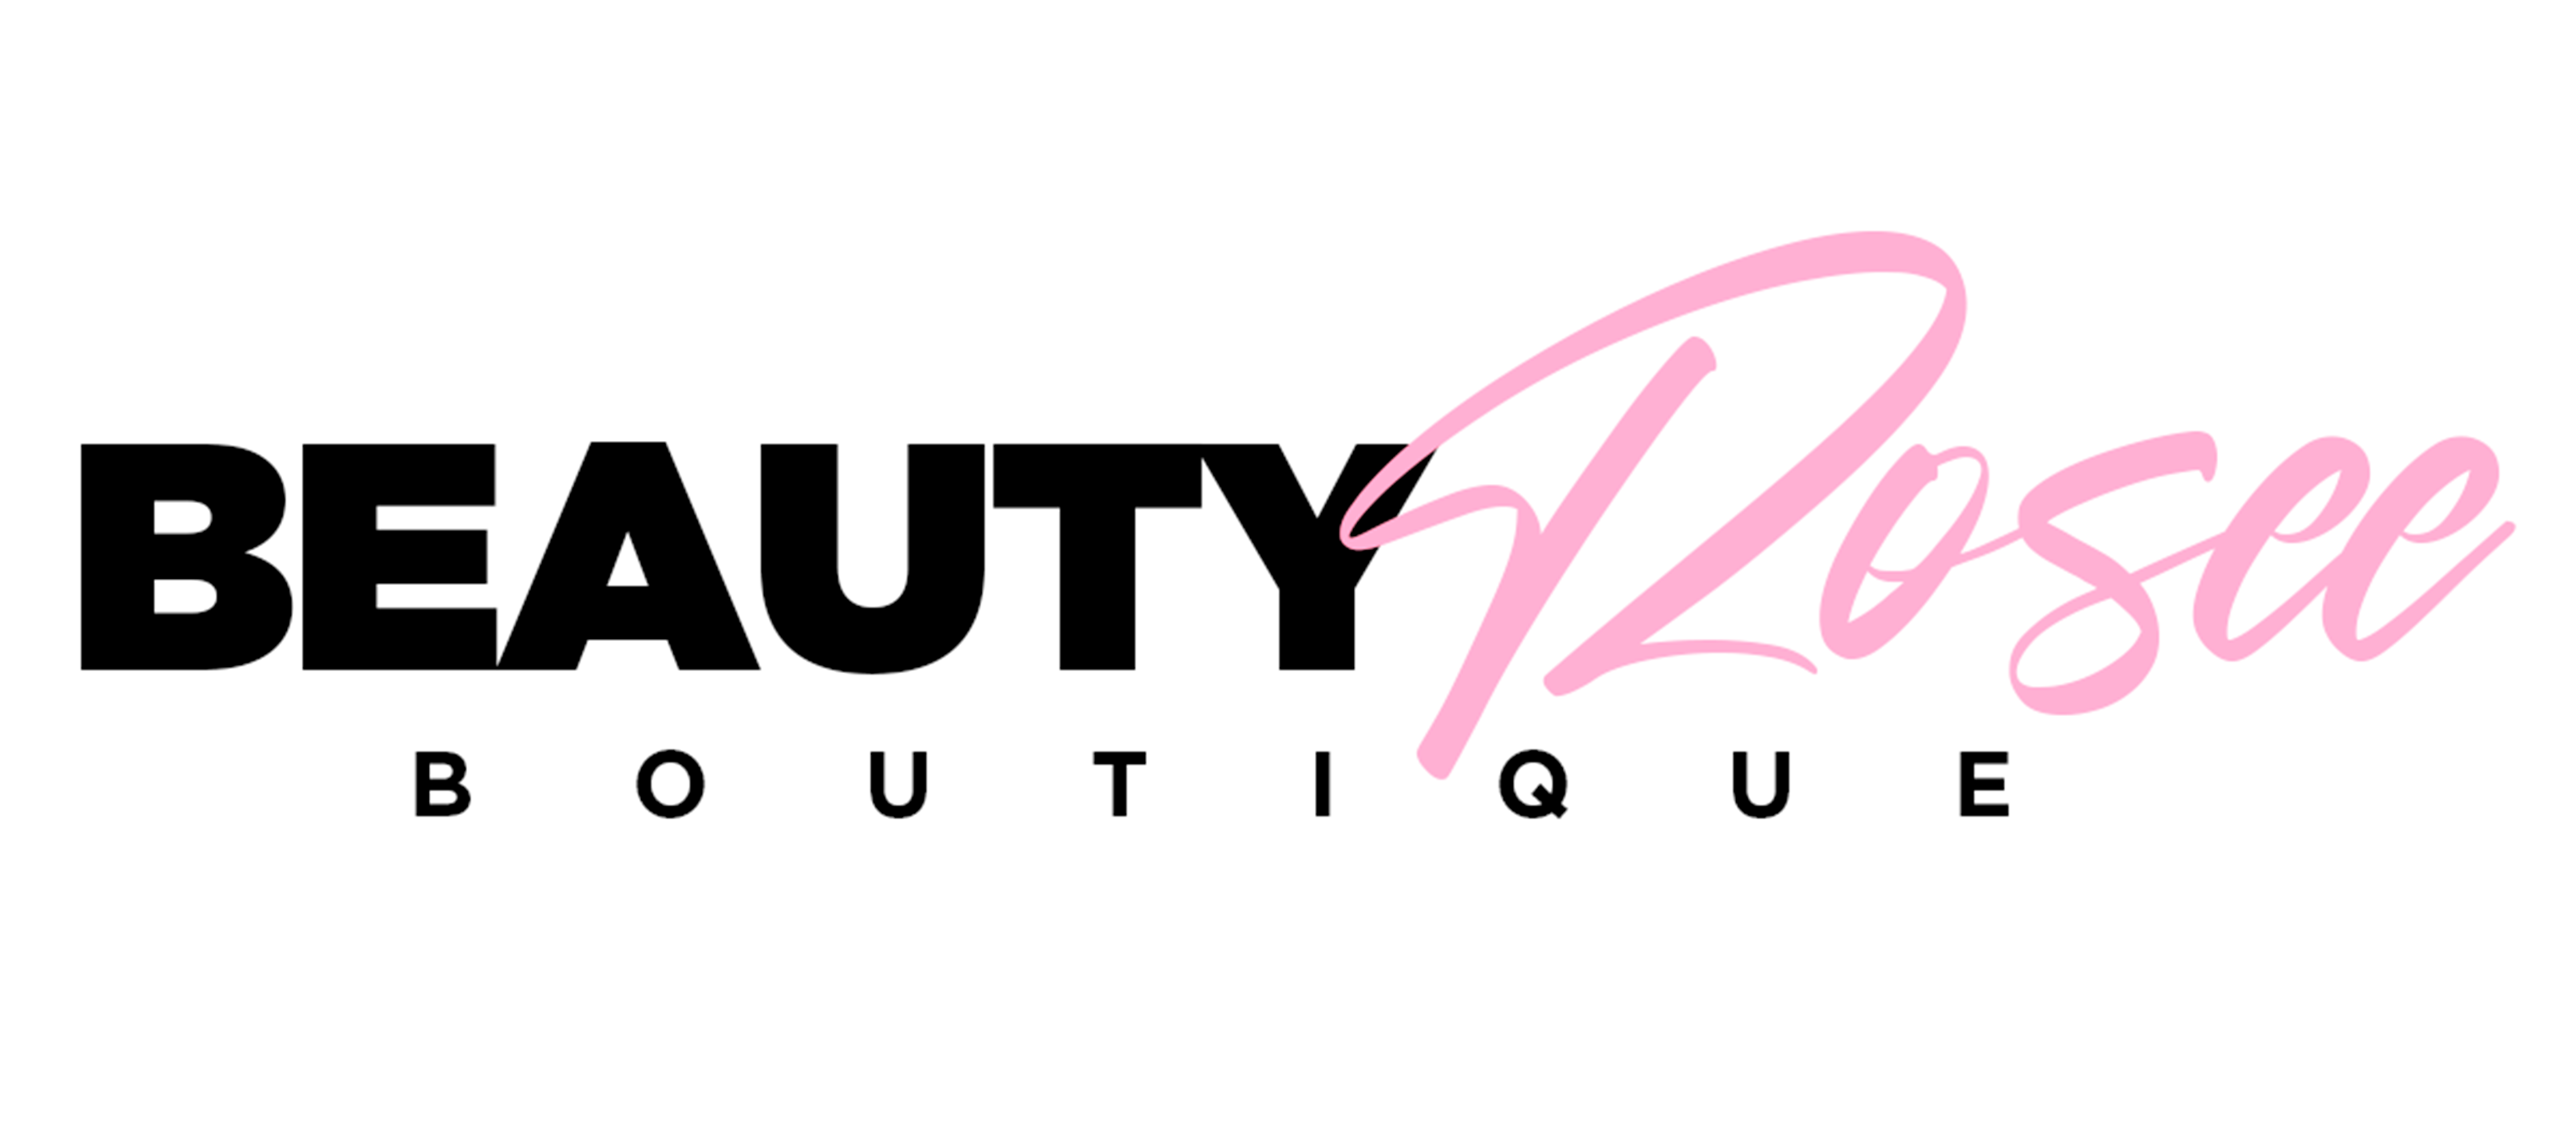 BeautyRosee Boutique